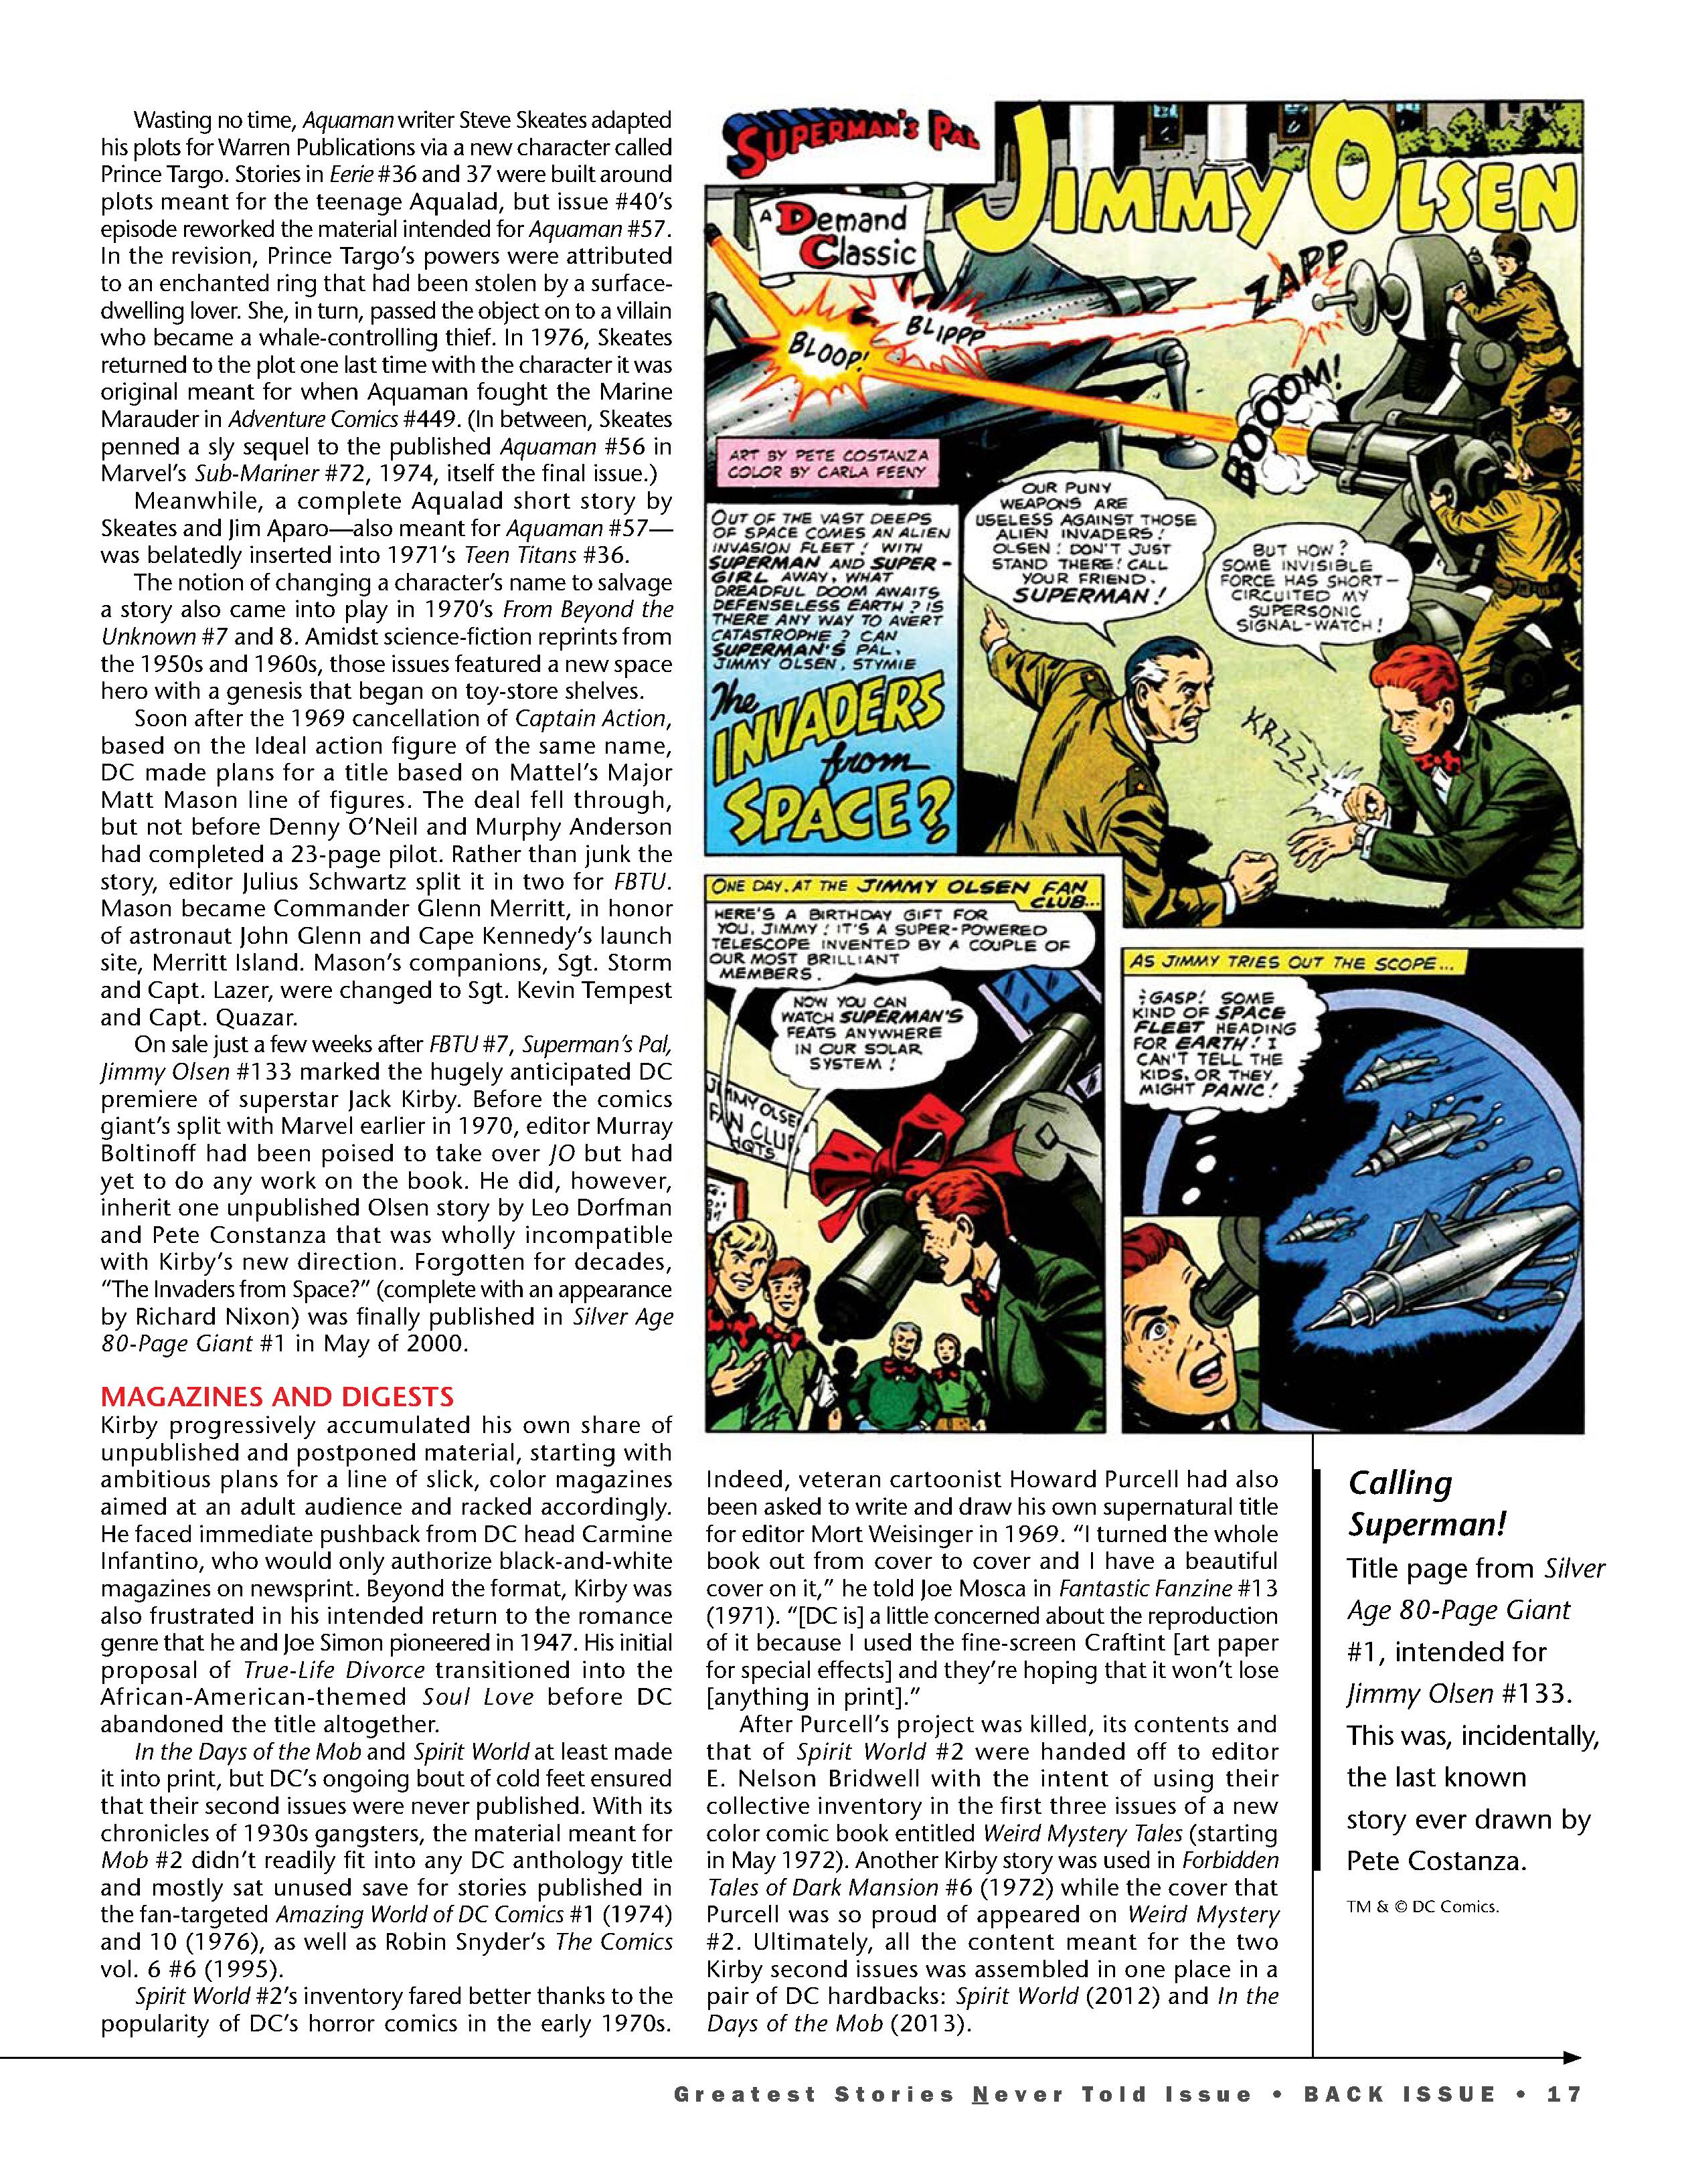 Read online Back Issue comic -  Issue #118 - 19